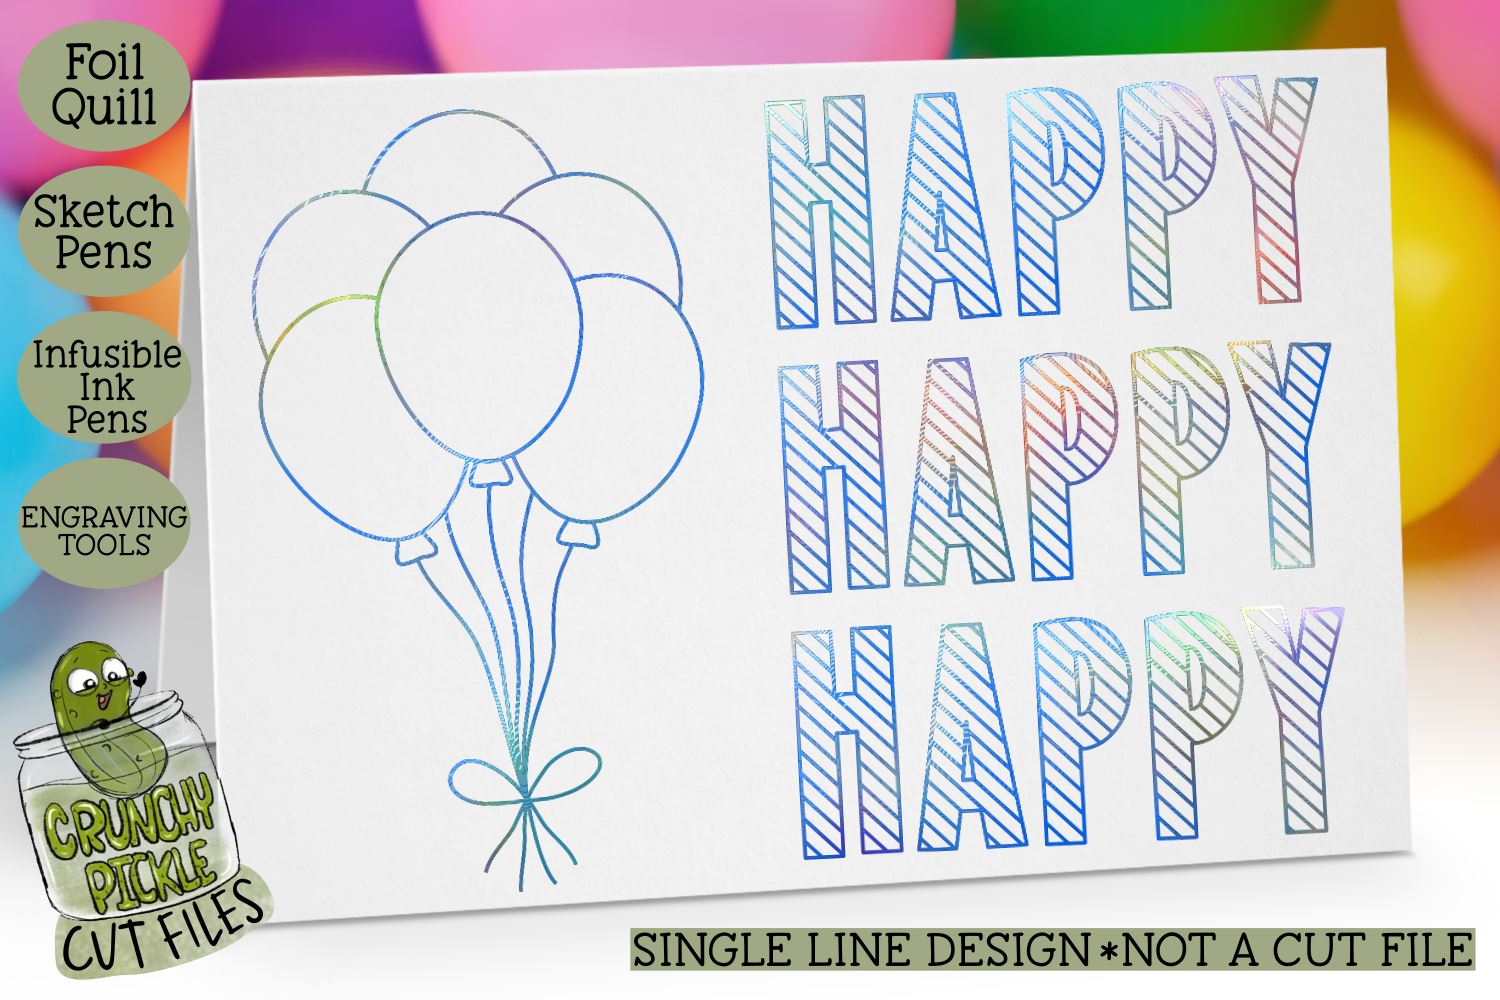 Foil Quill Birthday Card - Make a Wish / Single Line Sketch SVG